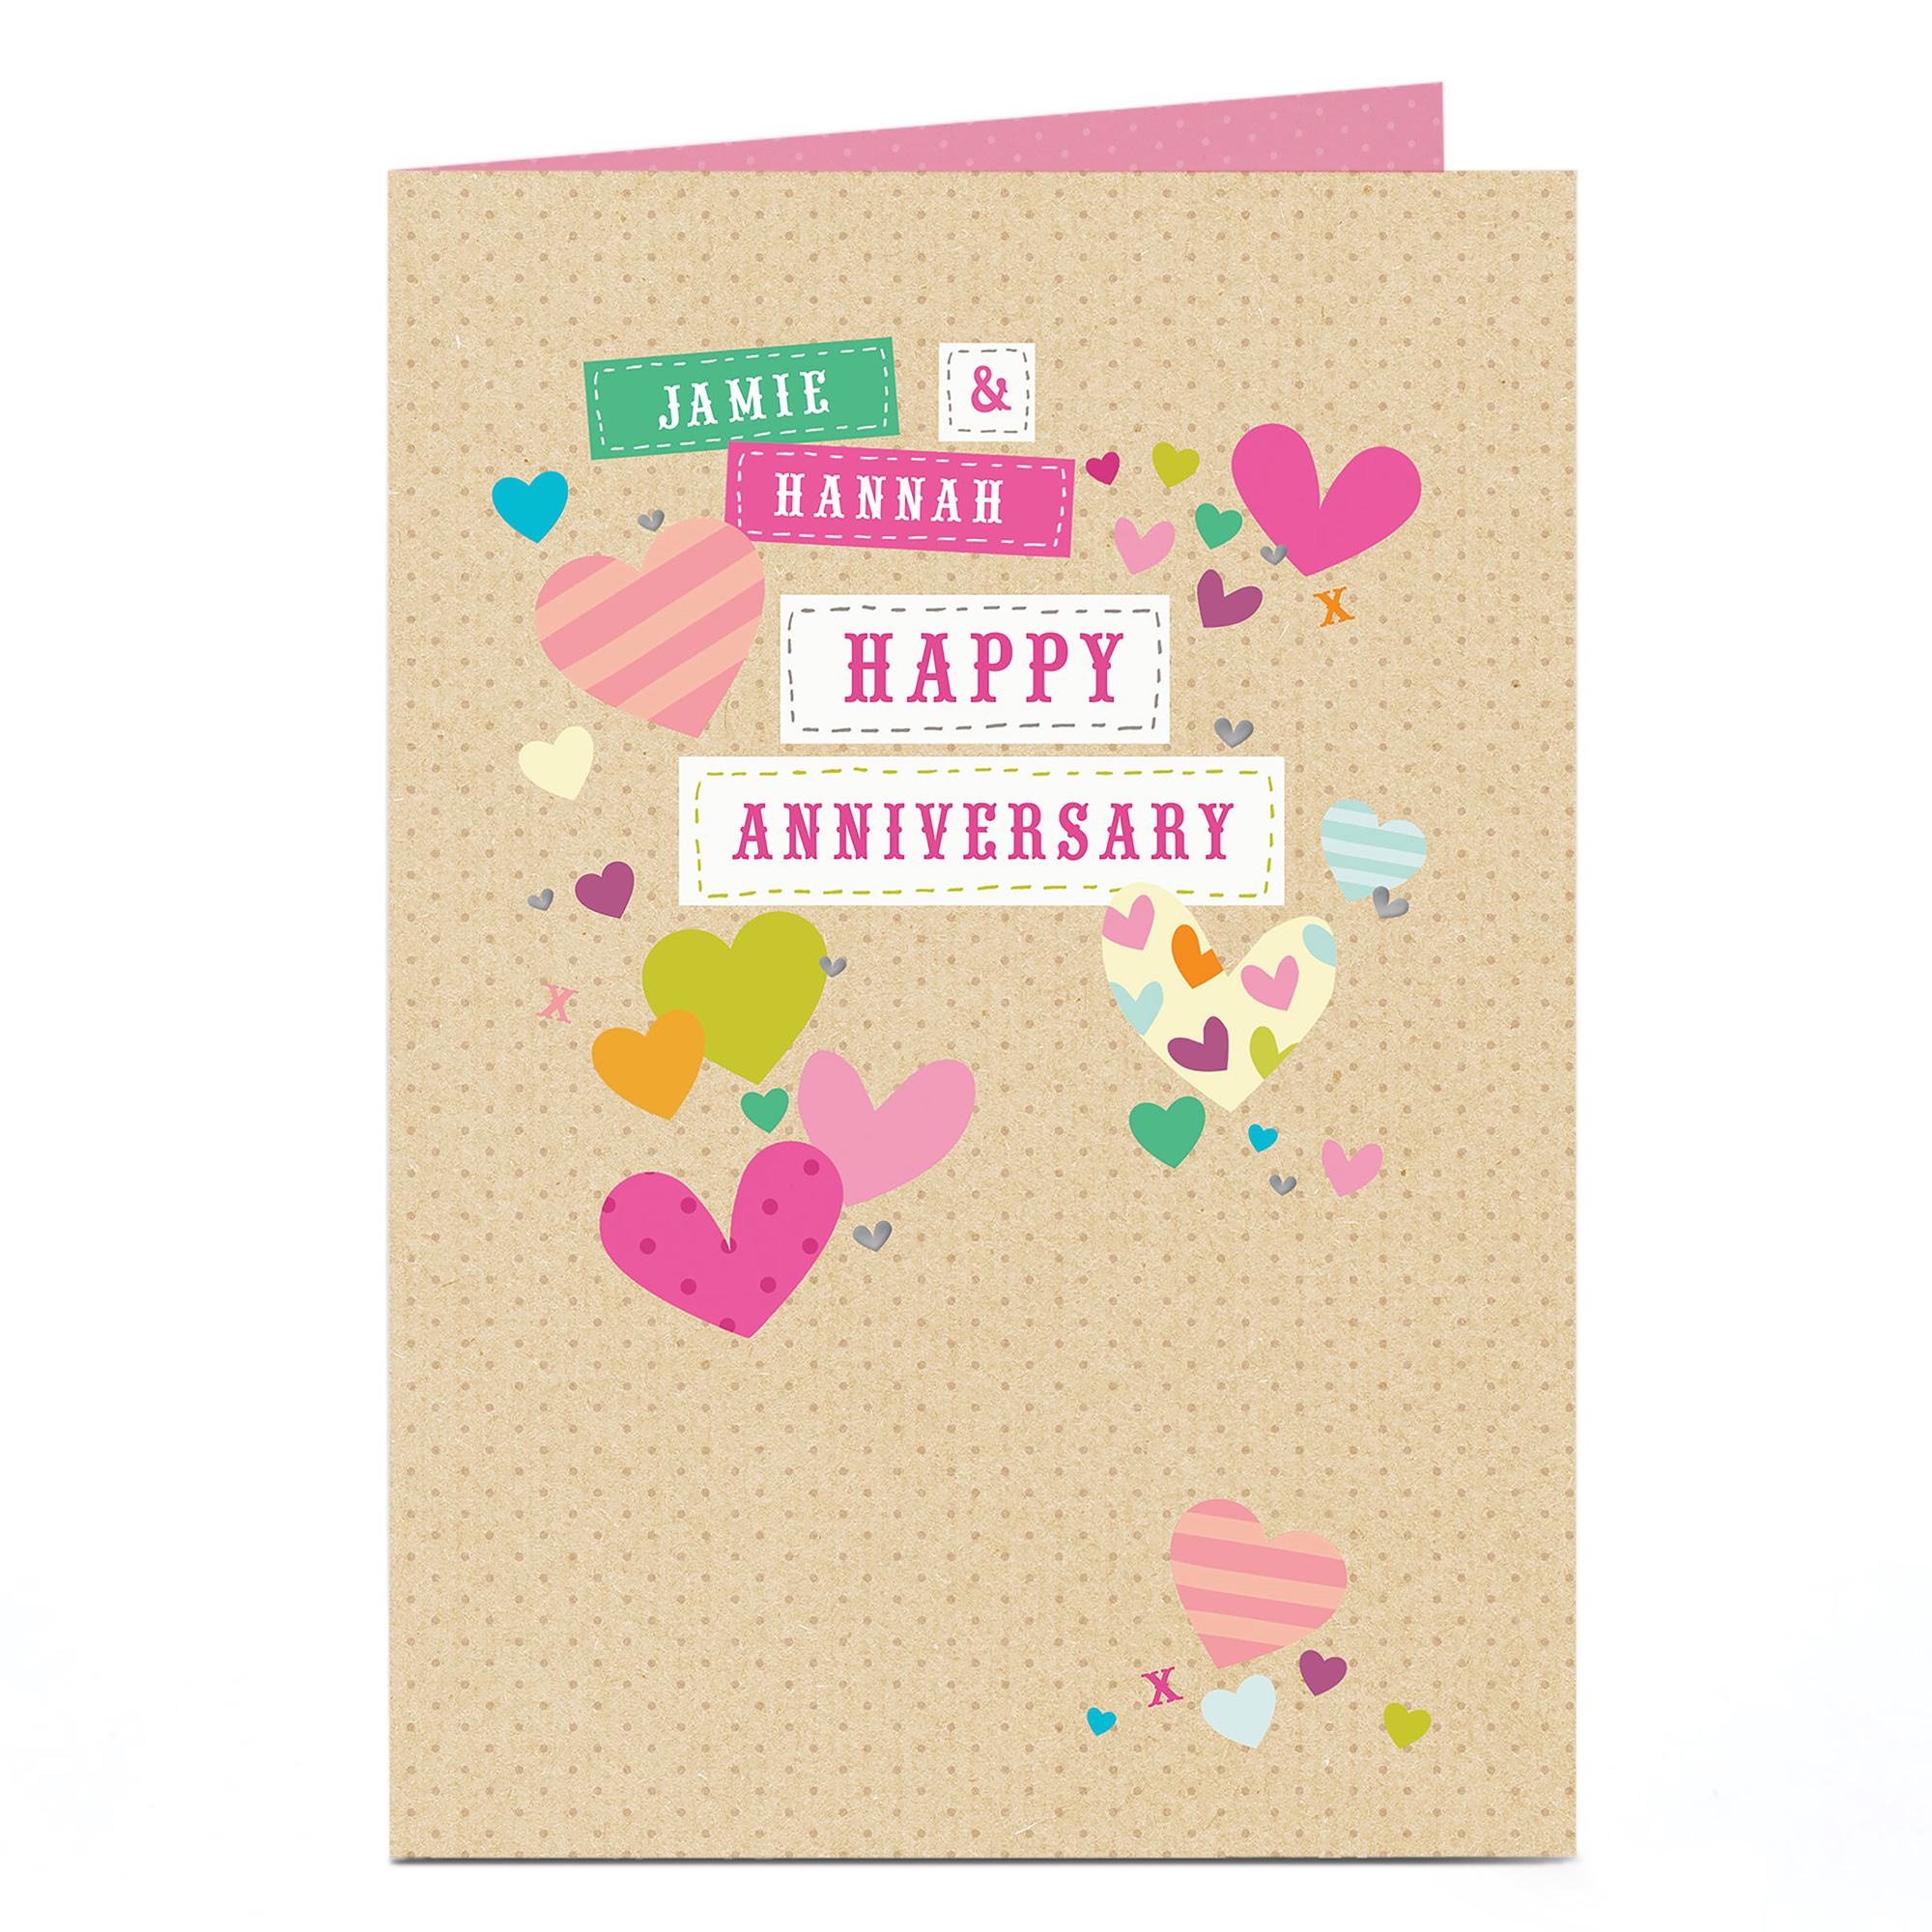 Buy Personalised Anniversary Card - Pretty Hearts for GBP 1.79 | Card ...